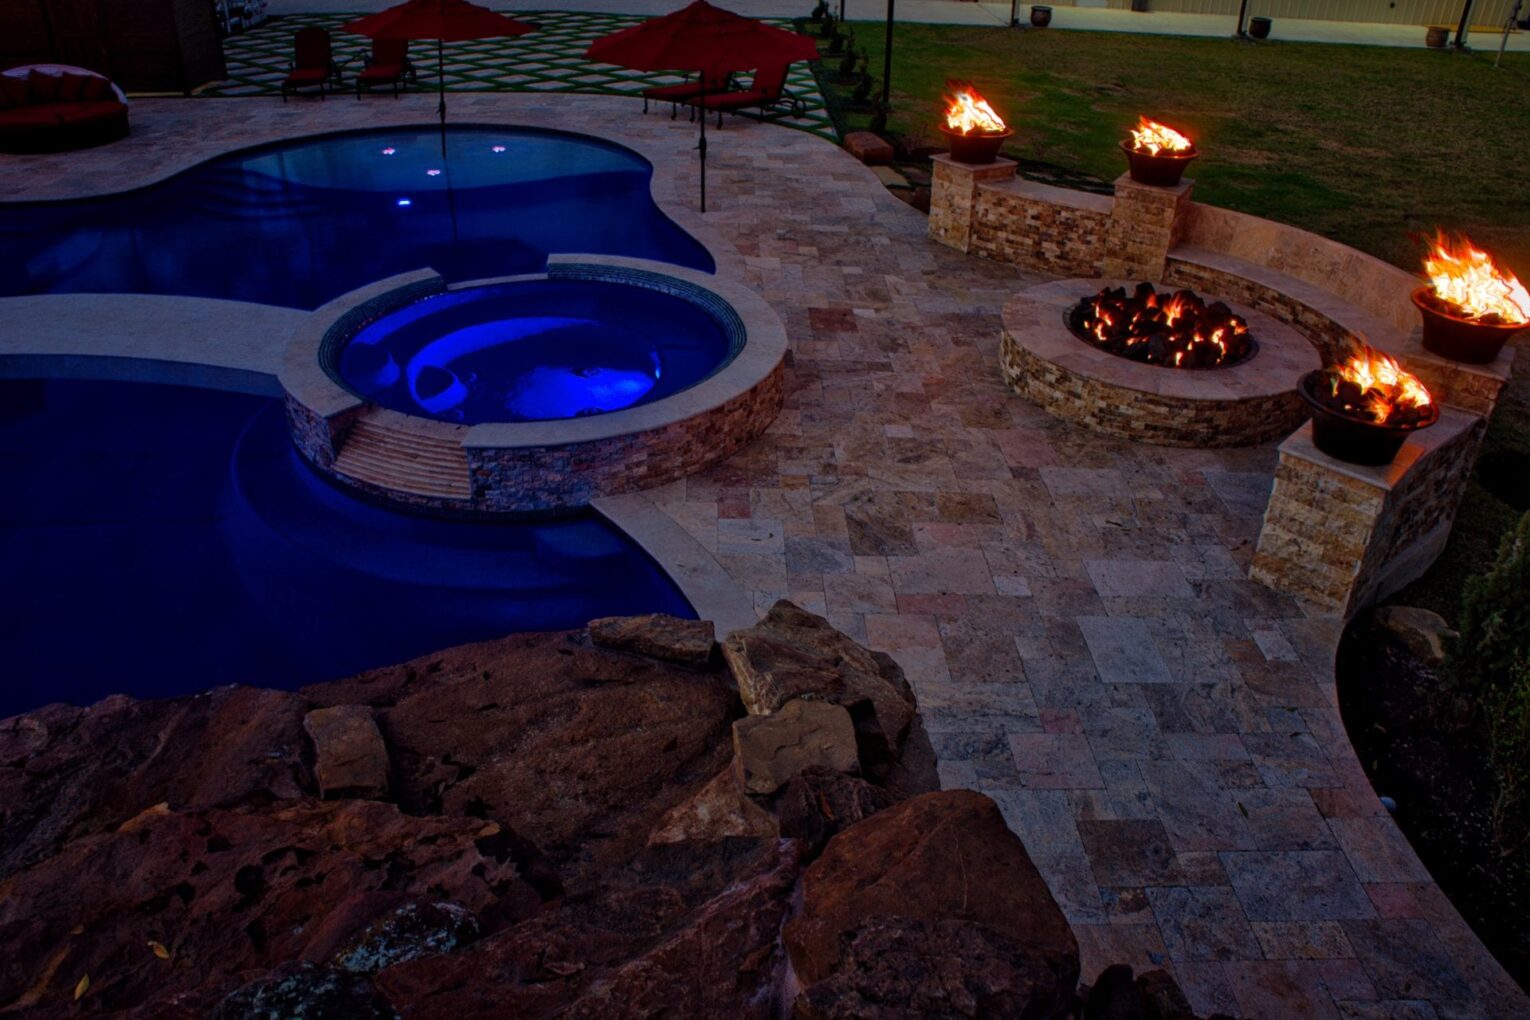 A pool with a fire pit and rocks around it